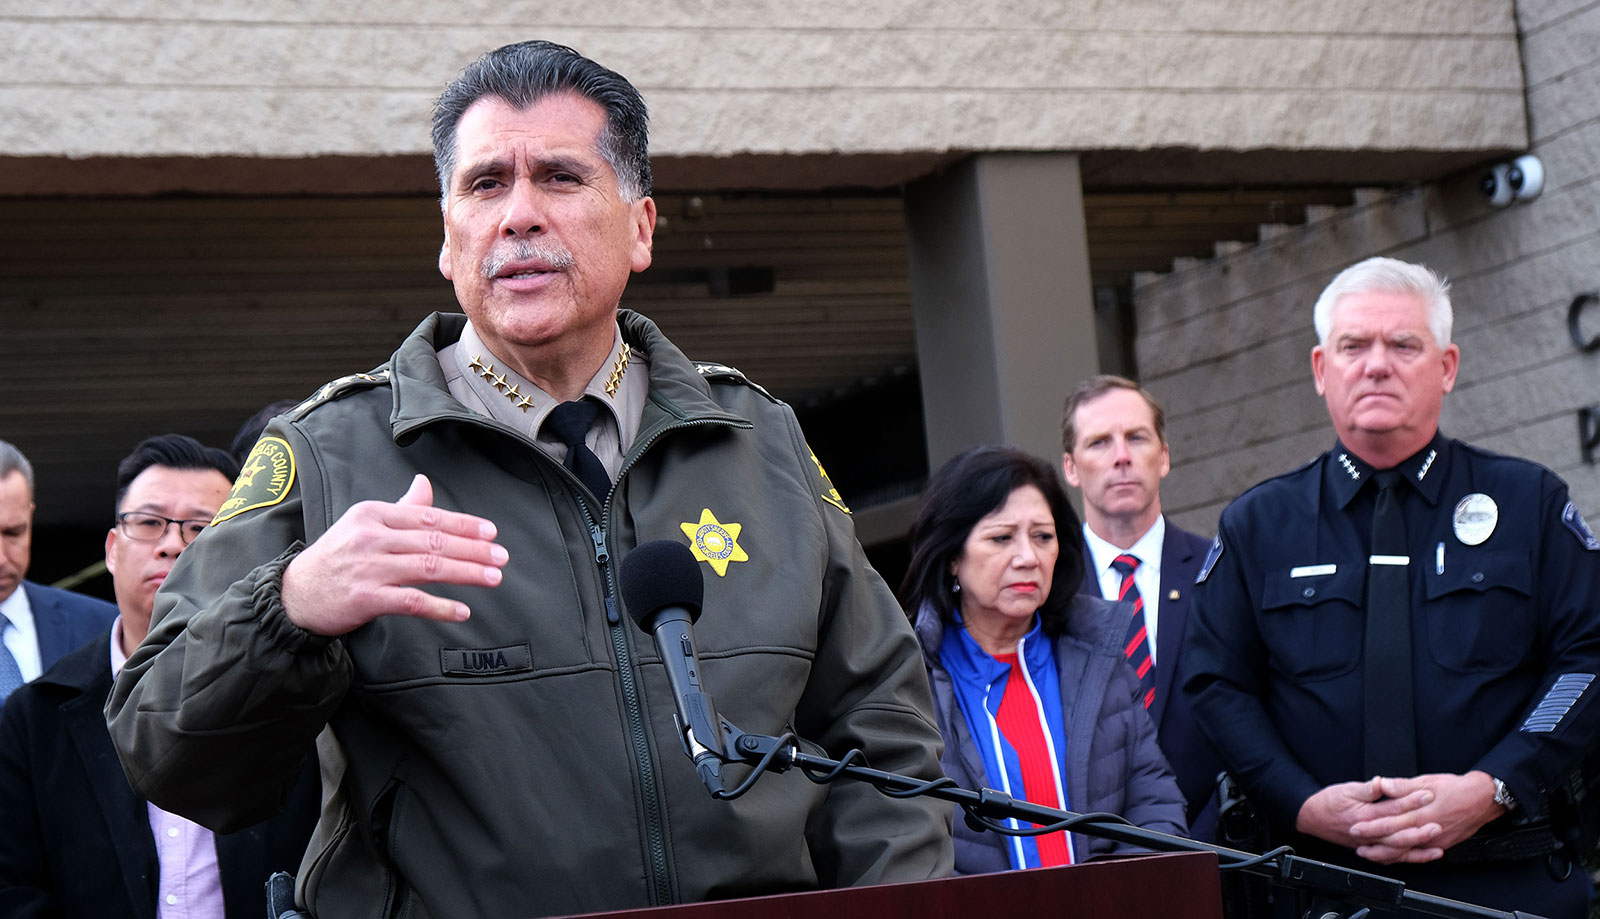 Los Angeles County Sheriff Robert Luna delivers remarks during a press conference in Monterey Park on Sunday, January 22.